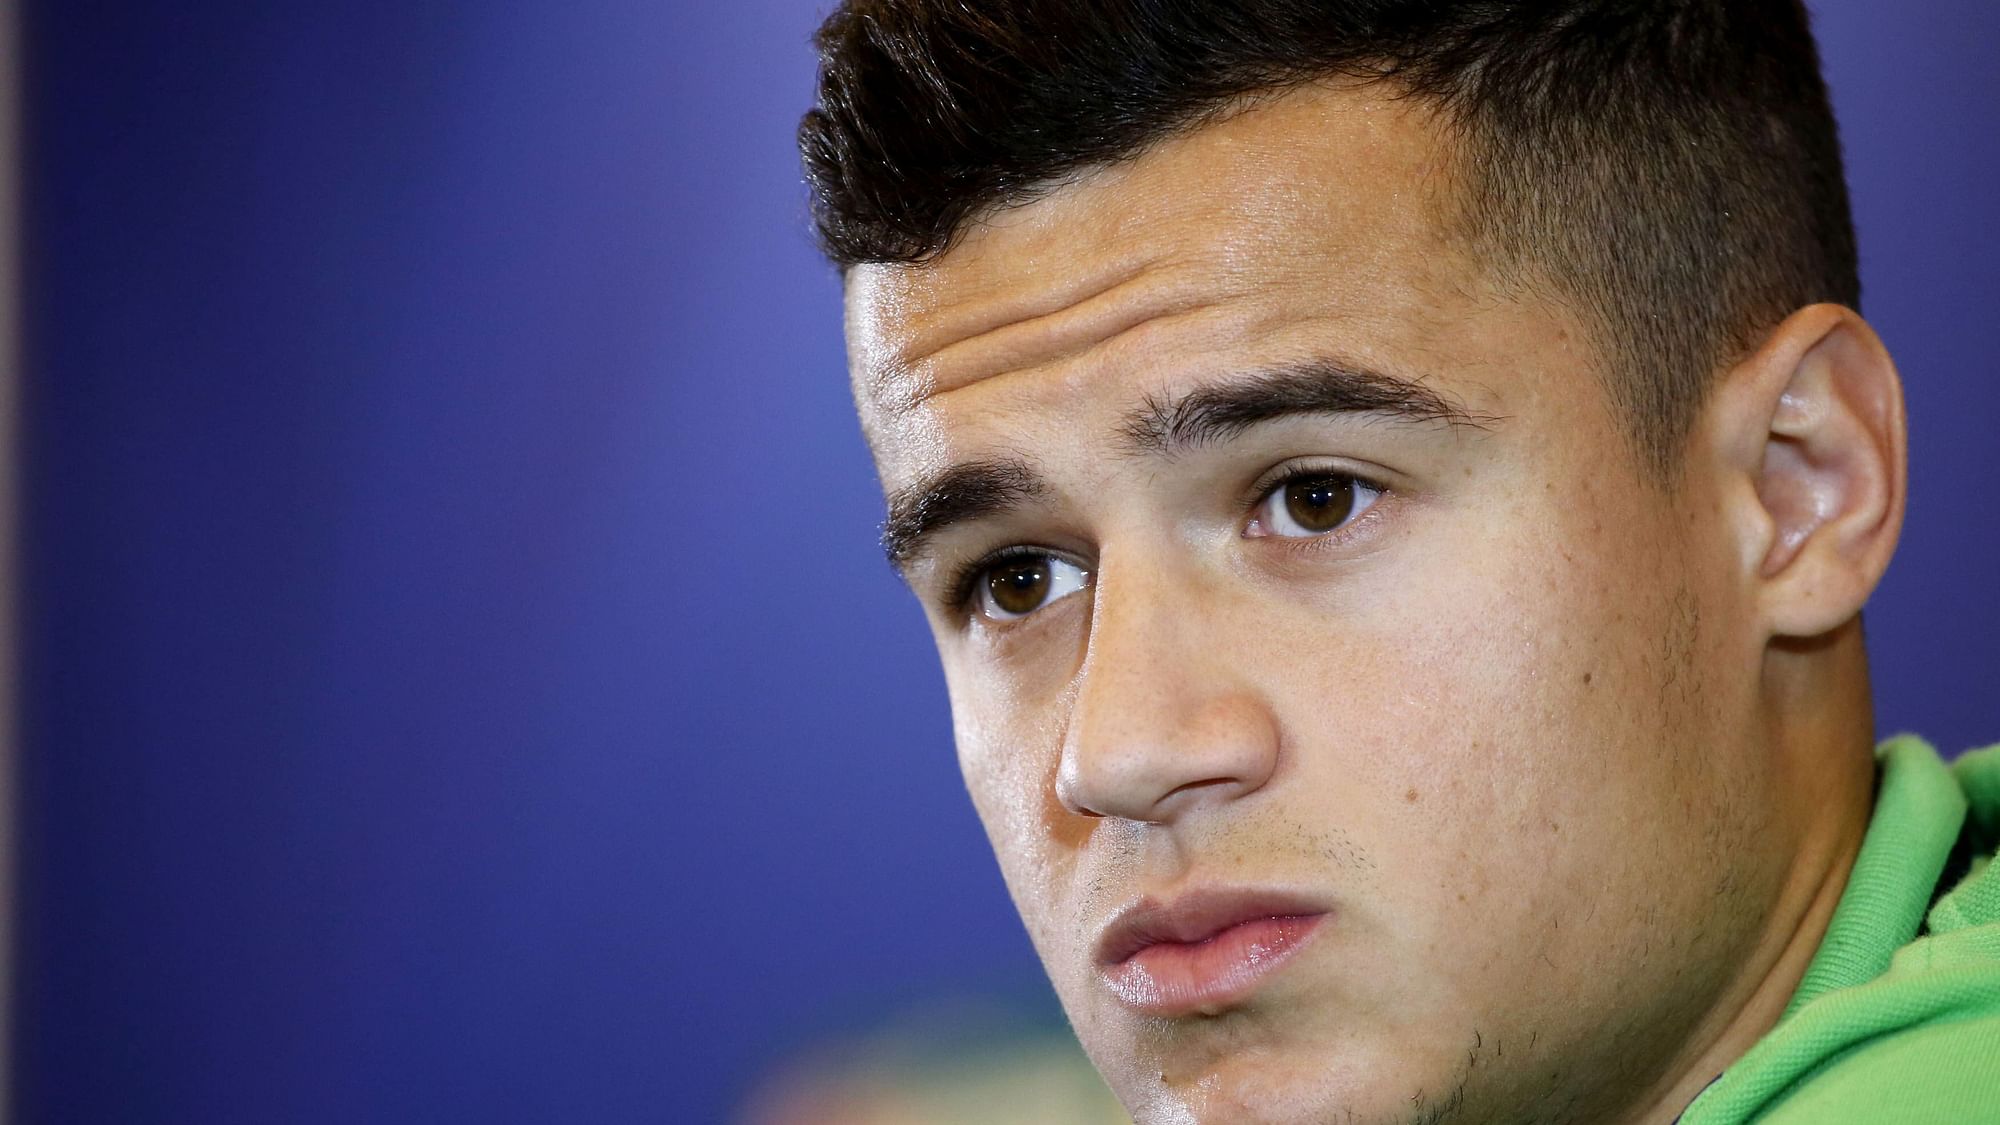 Reportedly, Barcelona said Bayern Munich will pay 8.5 million euros ($9.4 million) and Coutinho’s wages.